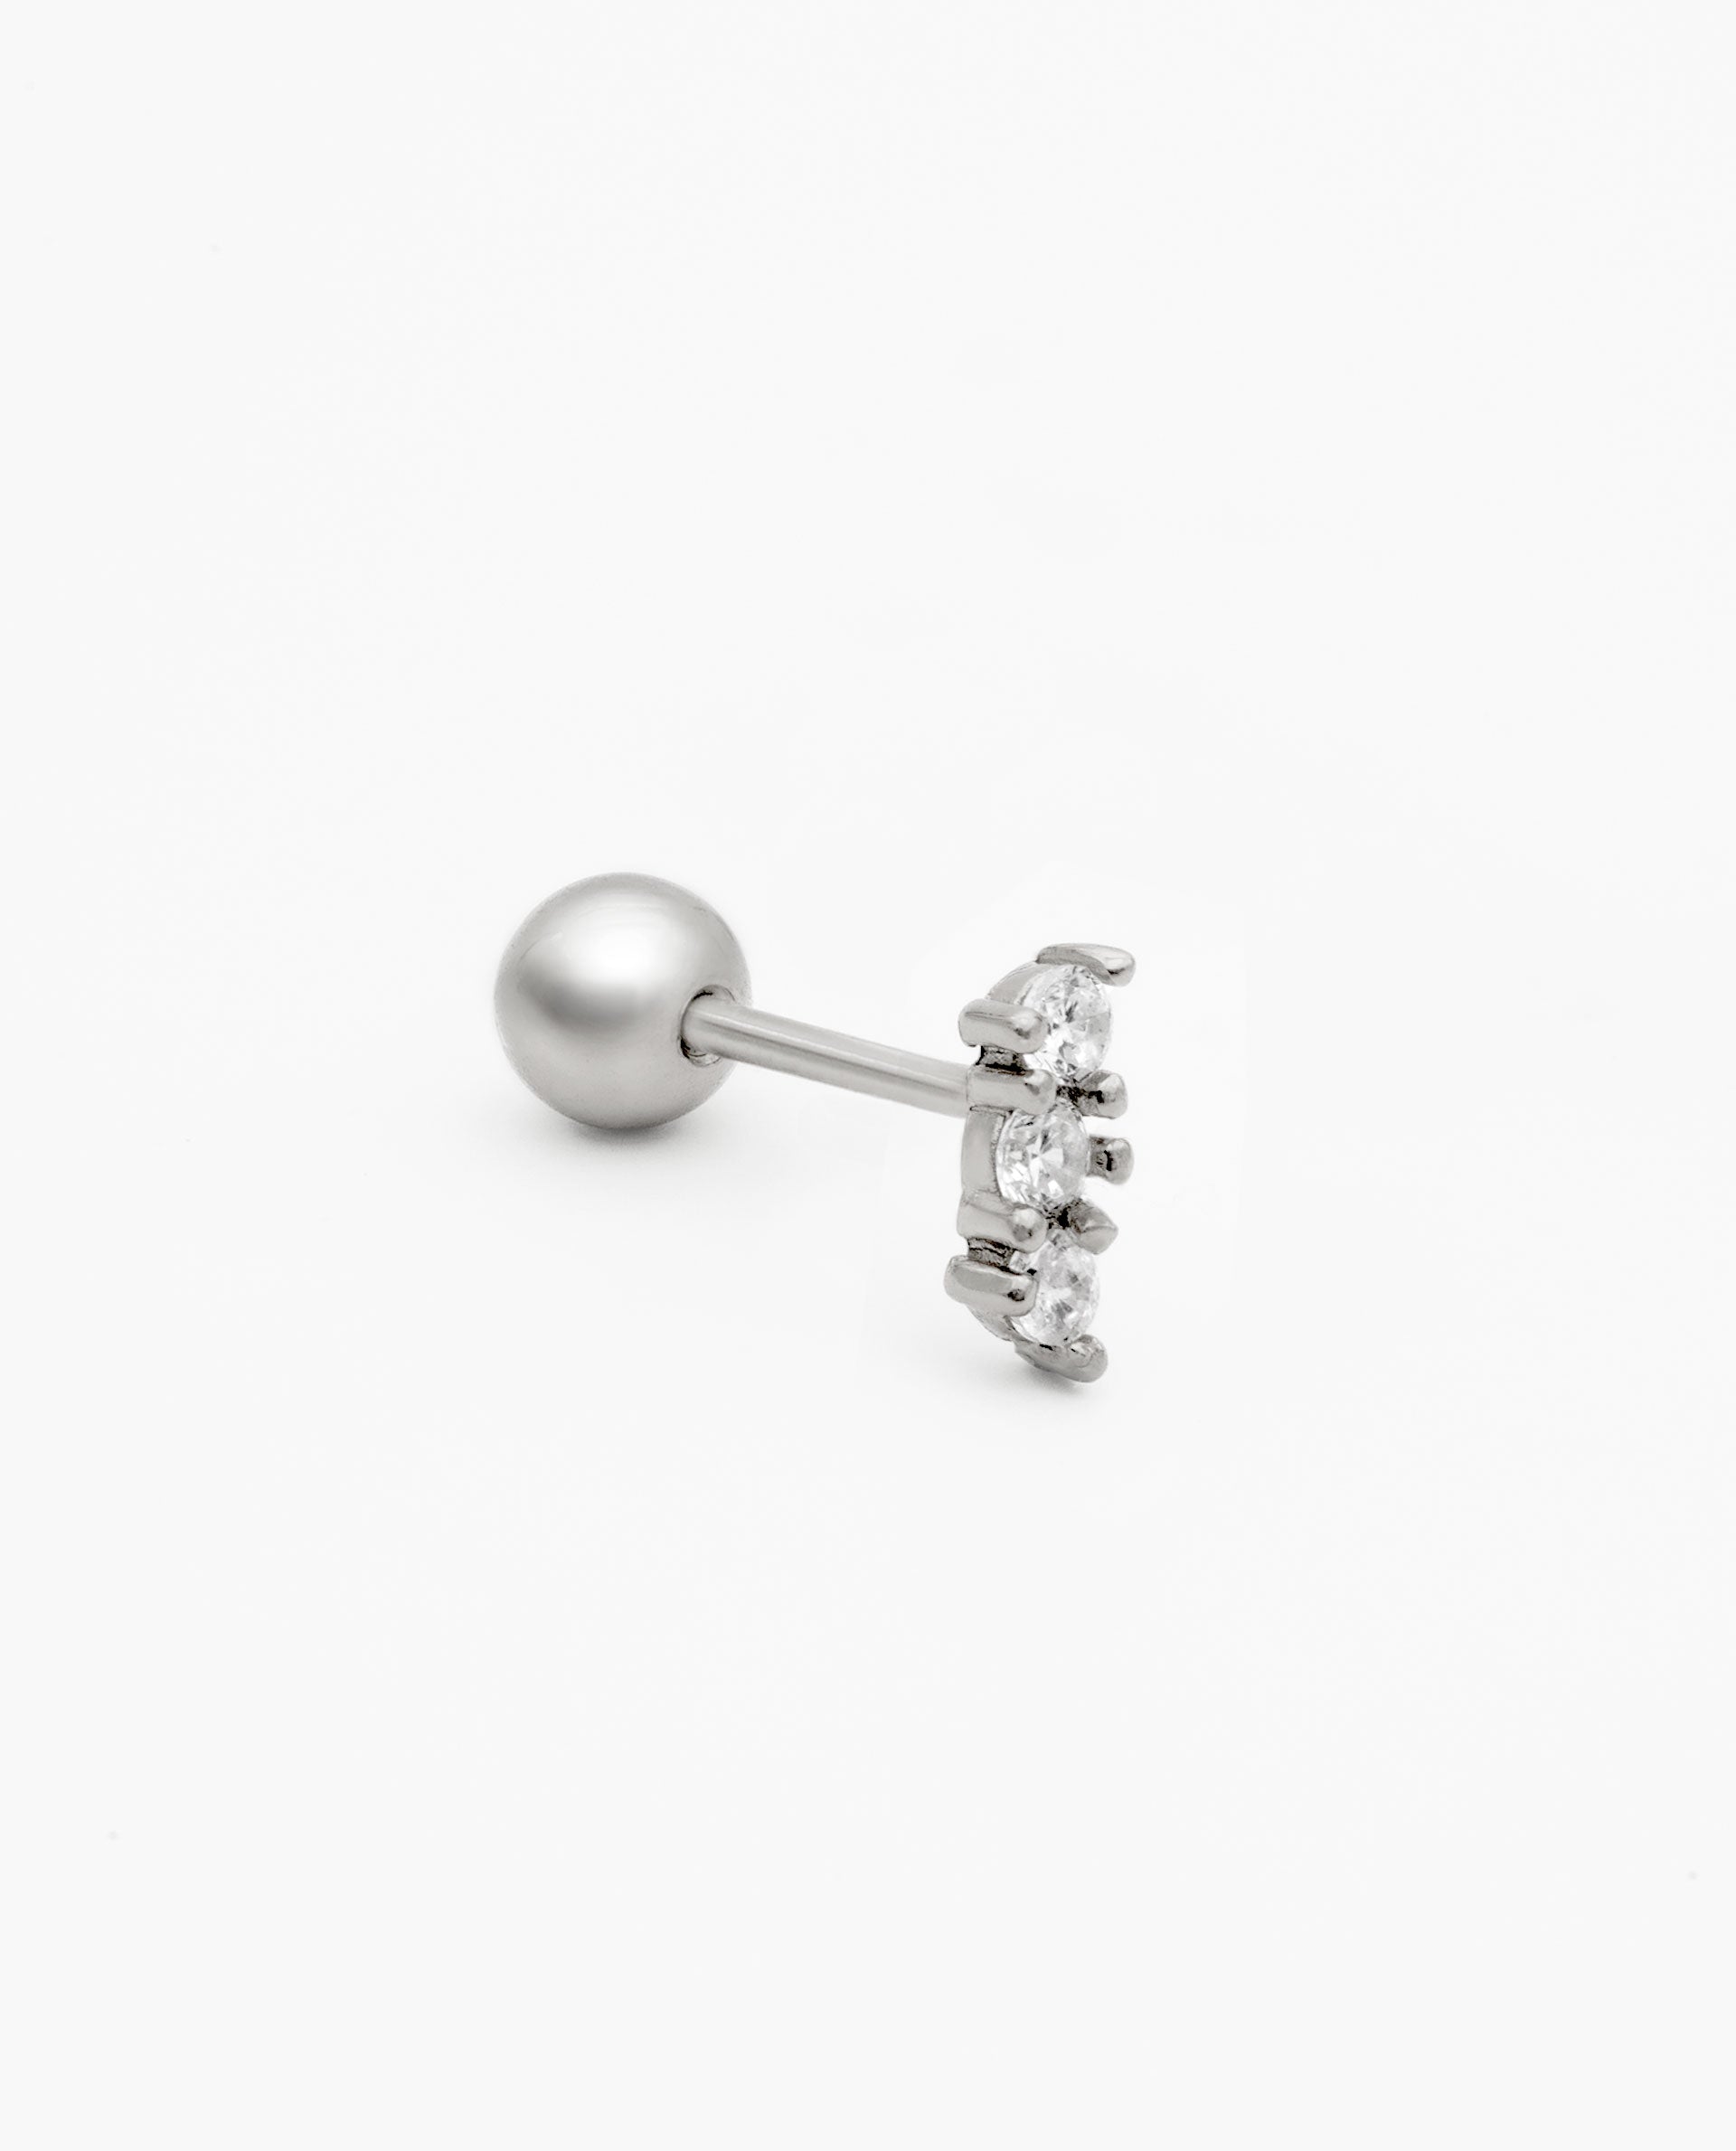 ORION PIERCING - SILVER